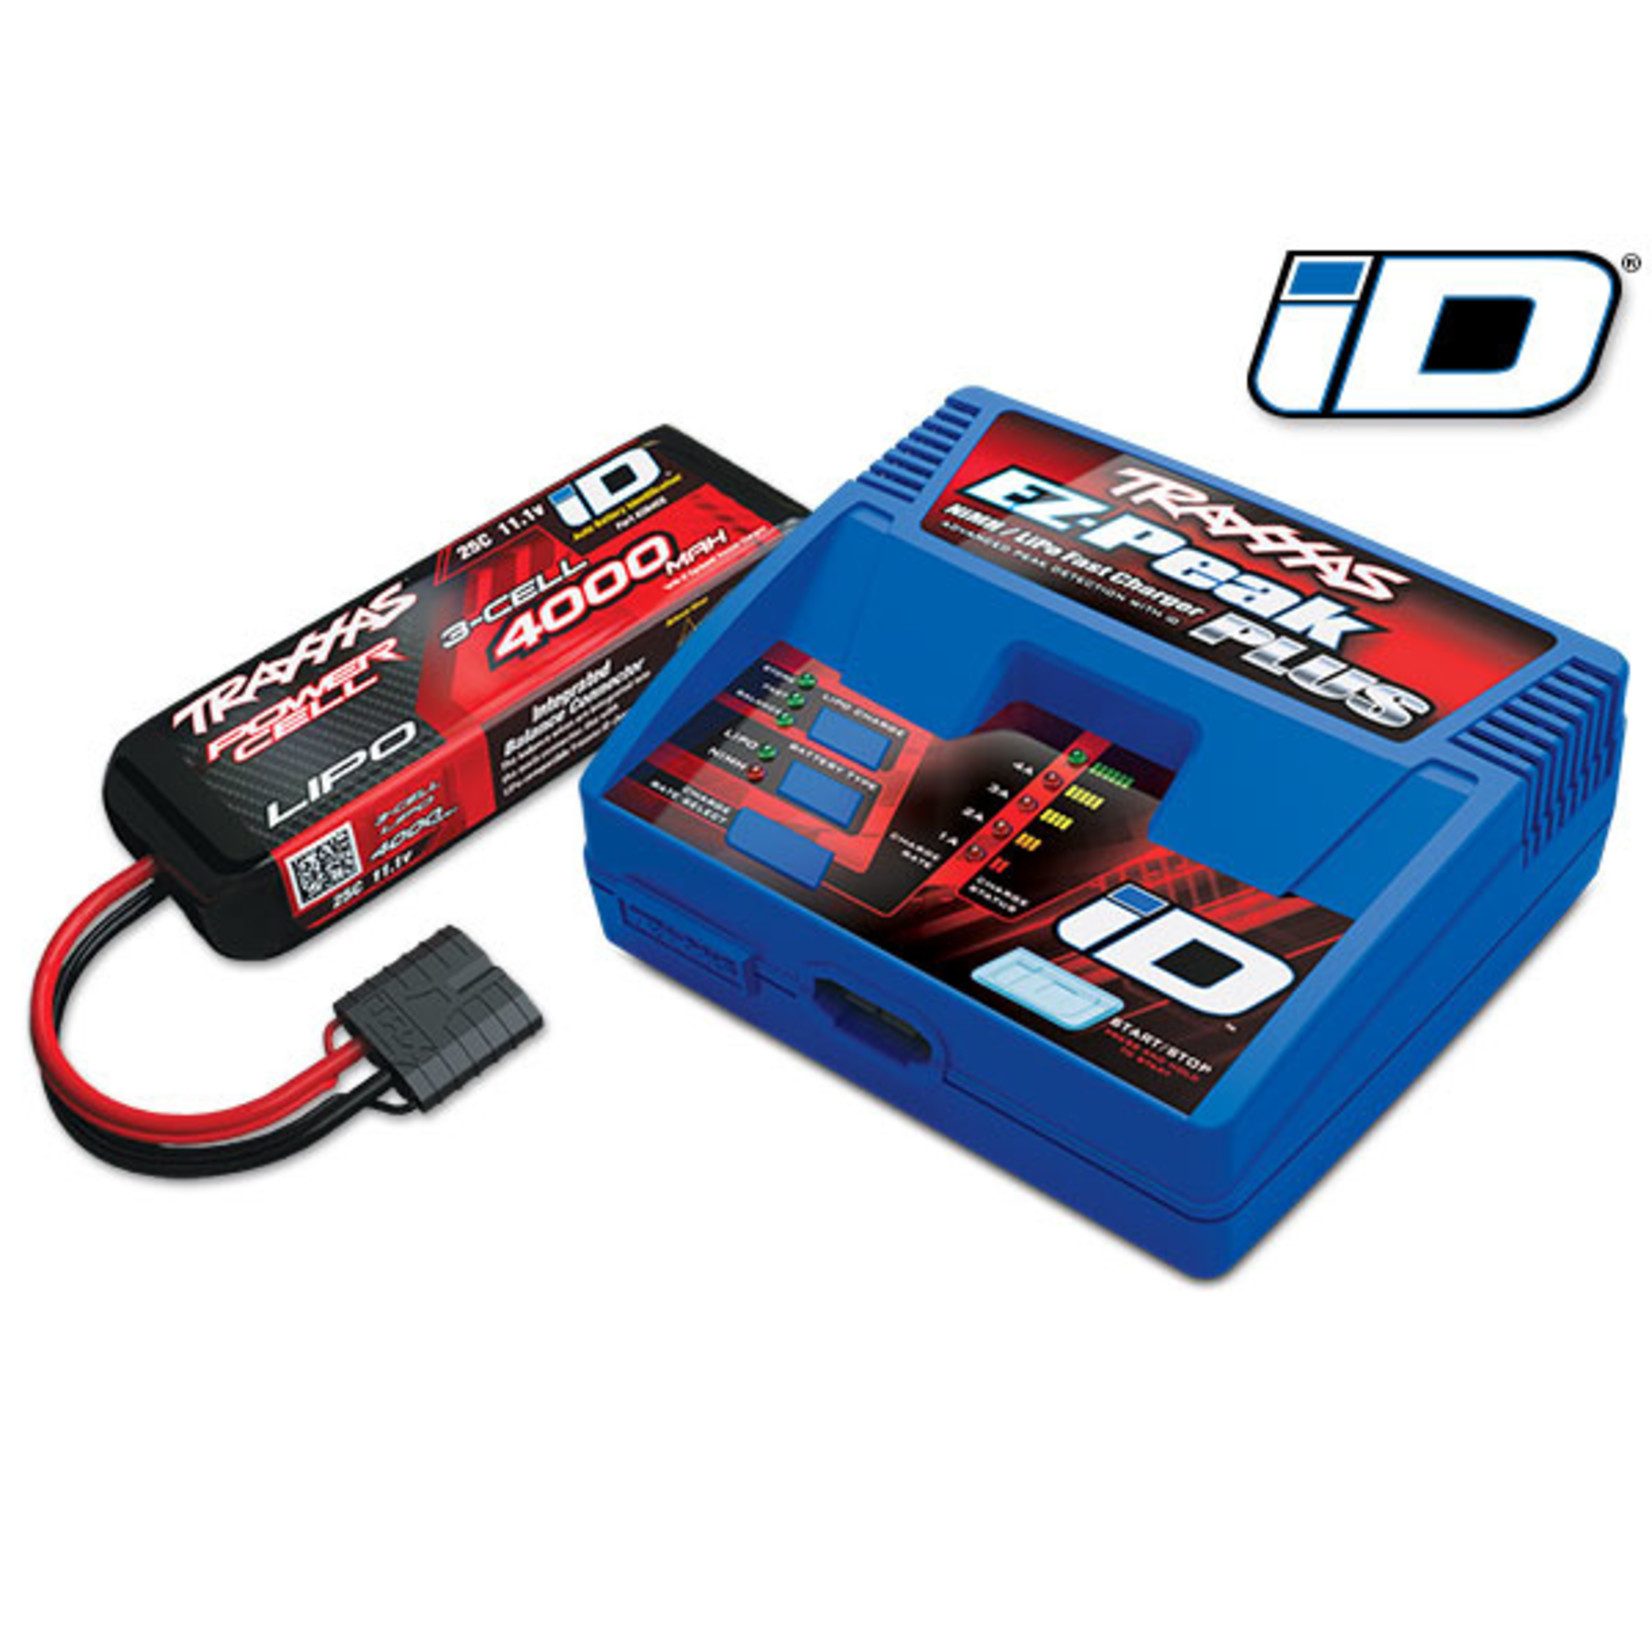 Traxxas 2994 - Battery/charger completer pack (includes #2